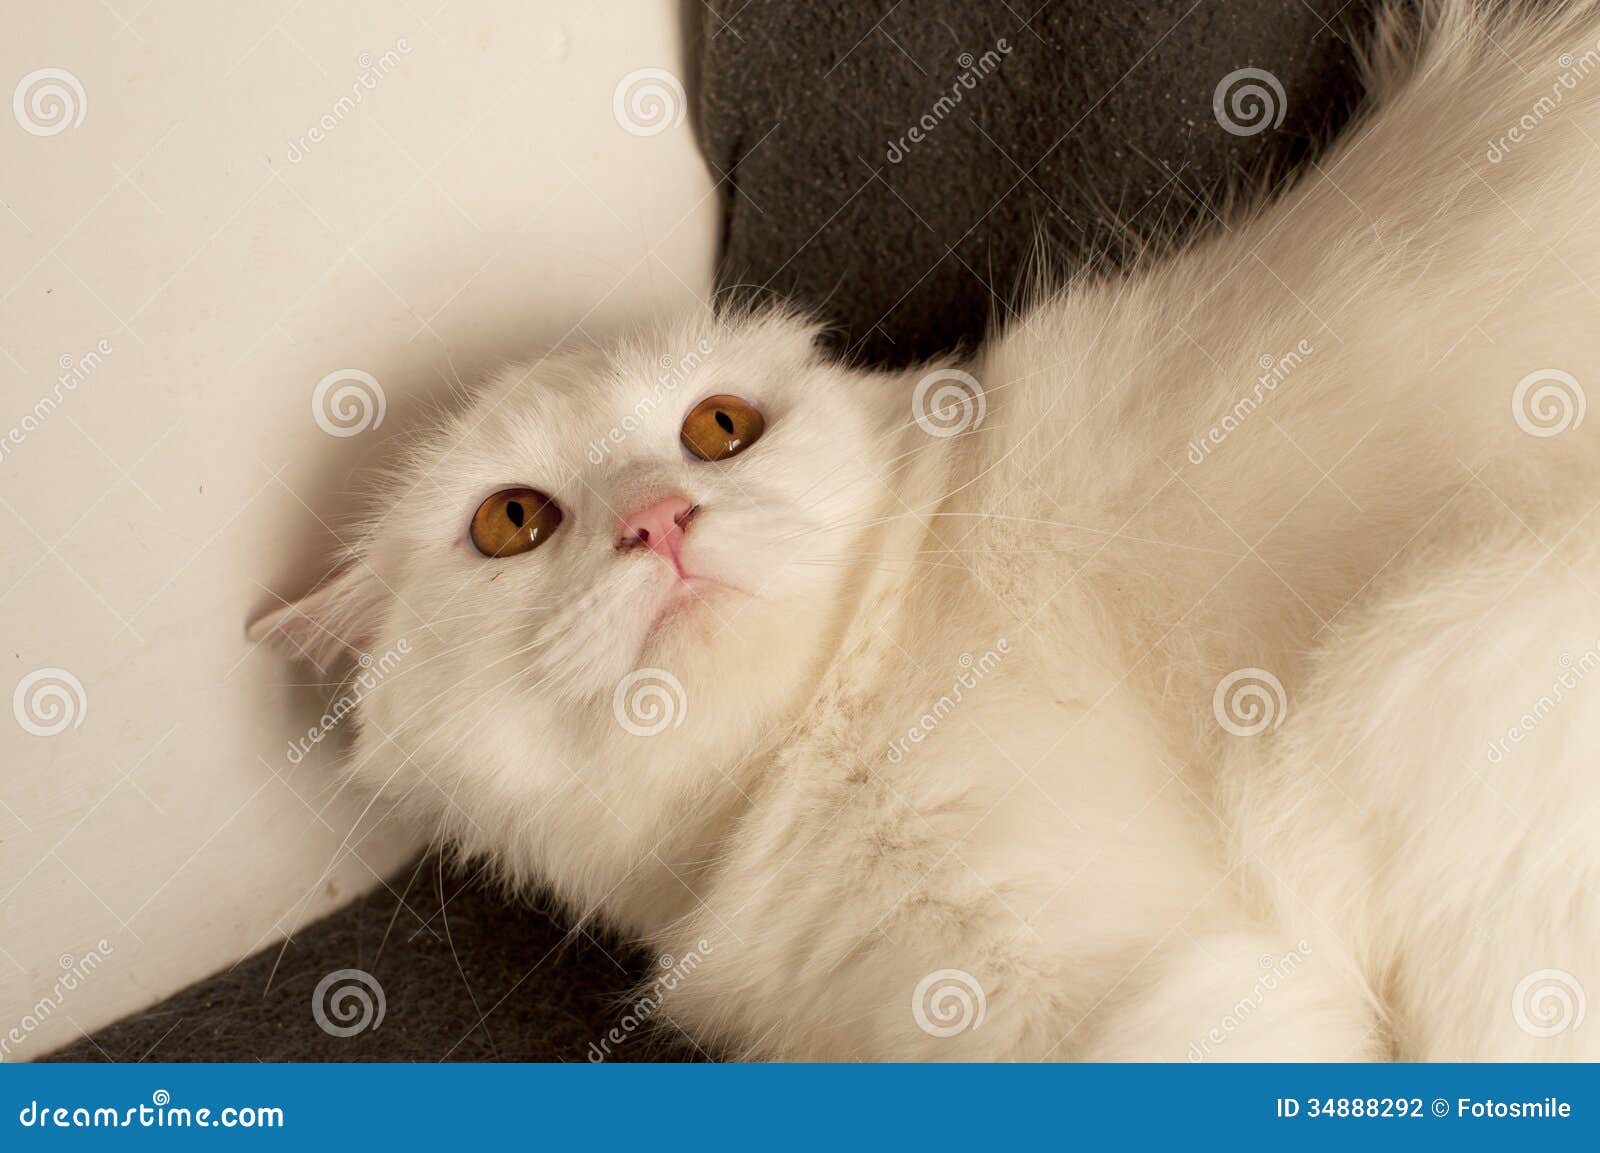 Scared cat stock photo. Image of folded, ears, turned ...